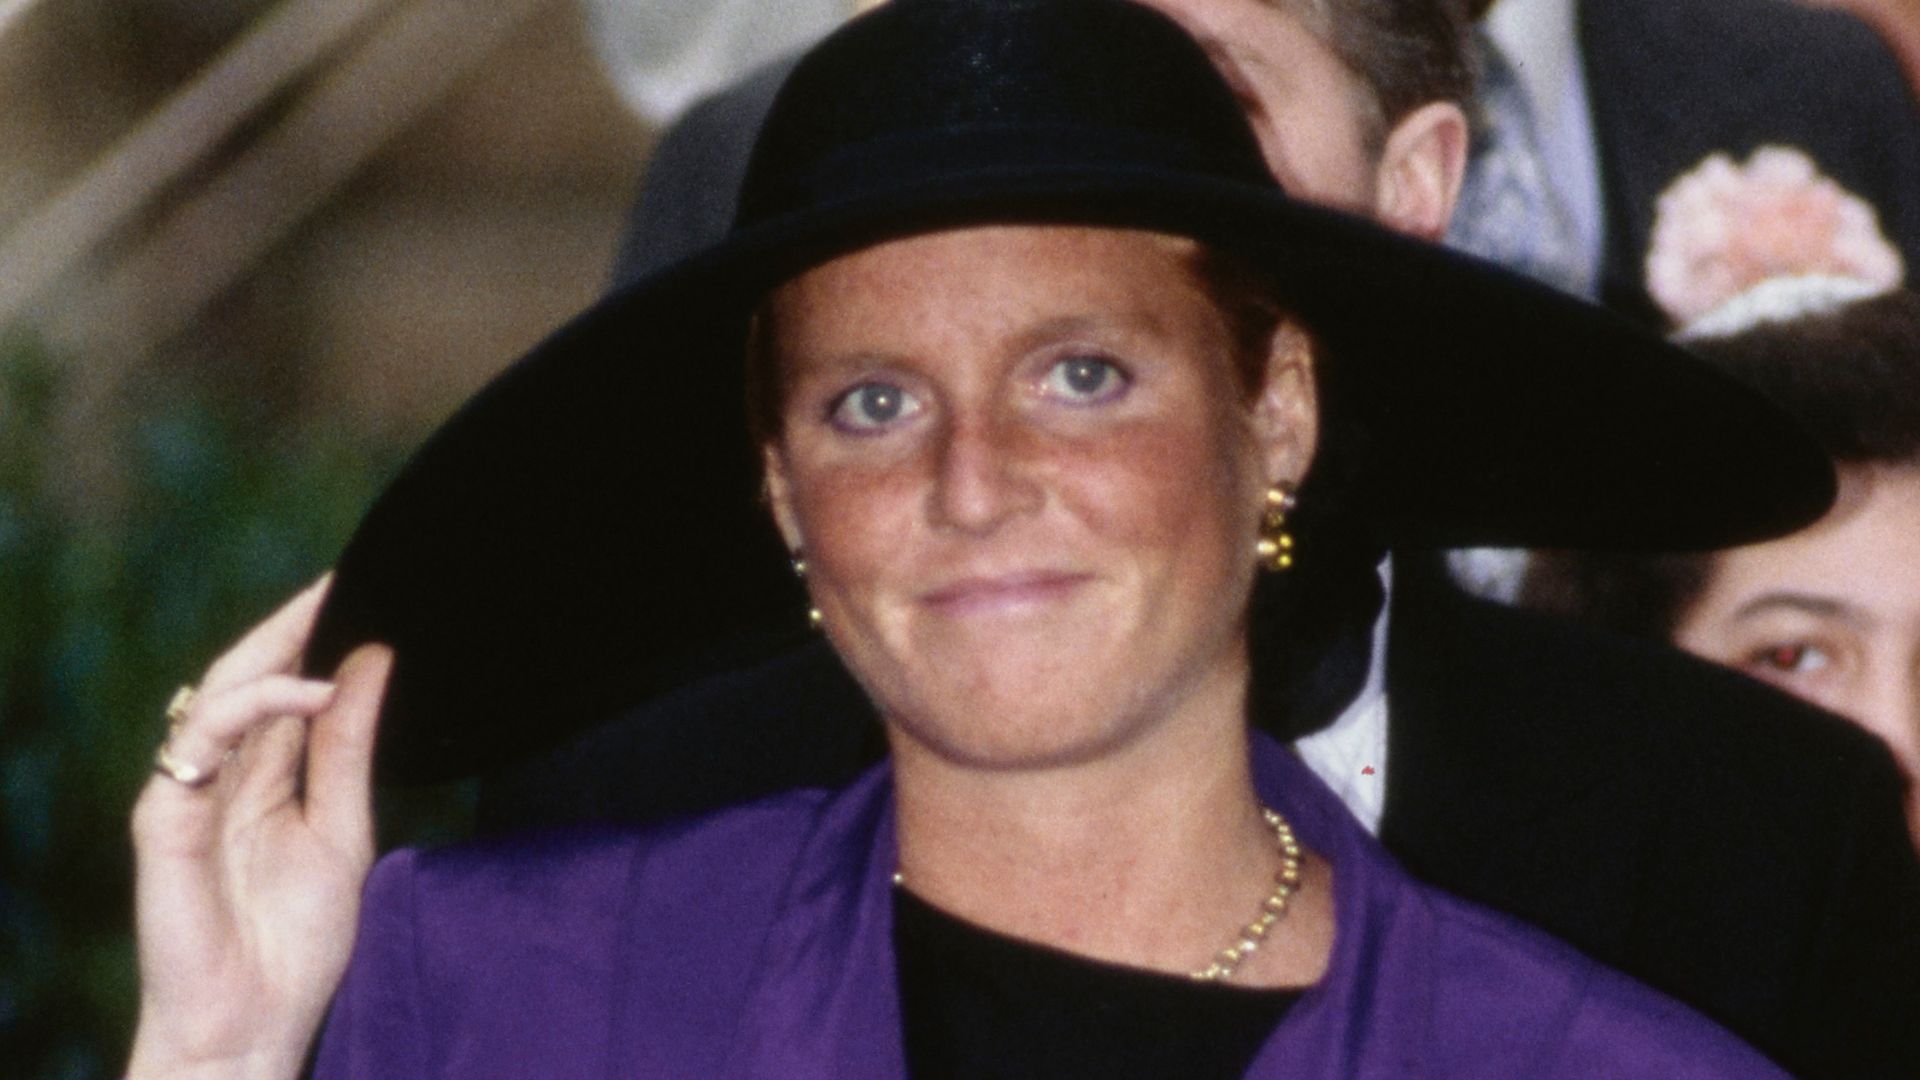 Sarah, Duchess of York wearing a baby bump-skimming purple outfit and holding her hat at the wedding of the Marquis of Marlborough and Rebecca Few Brown